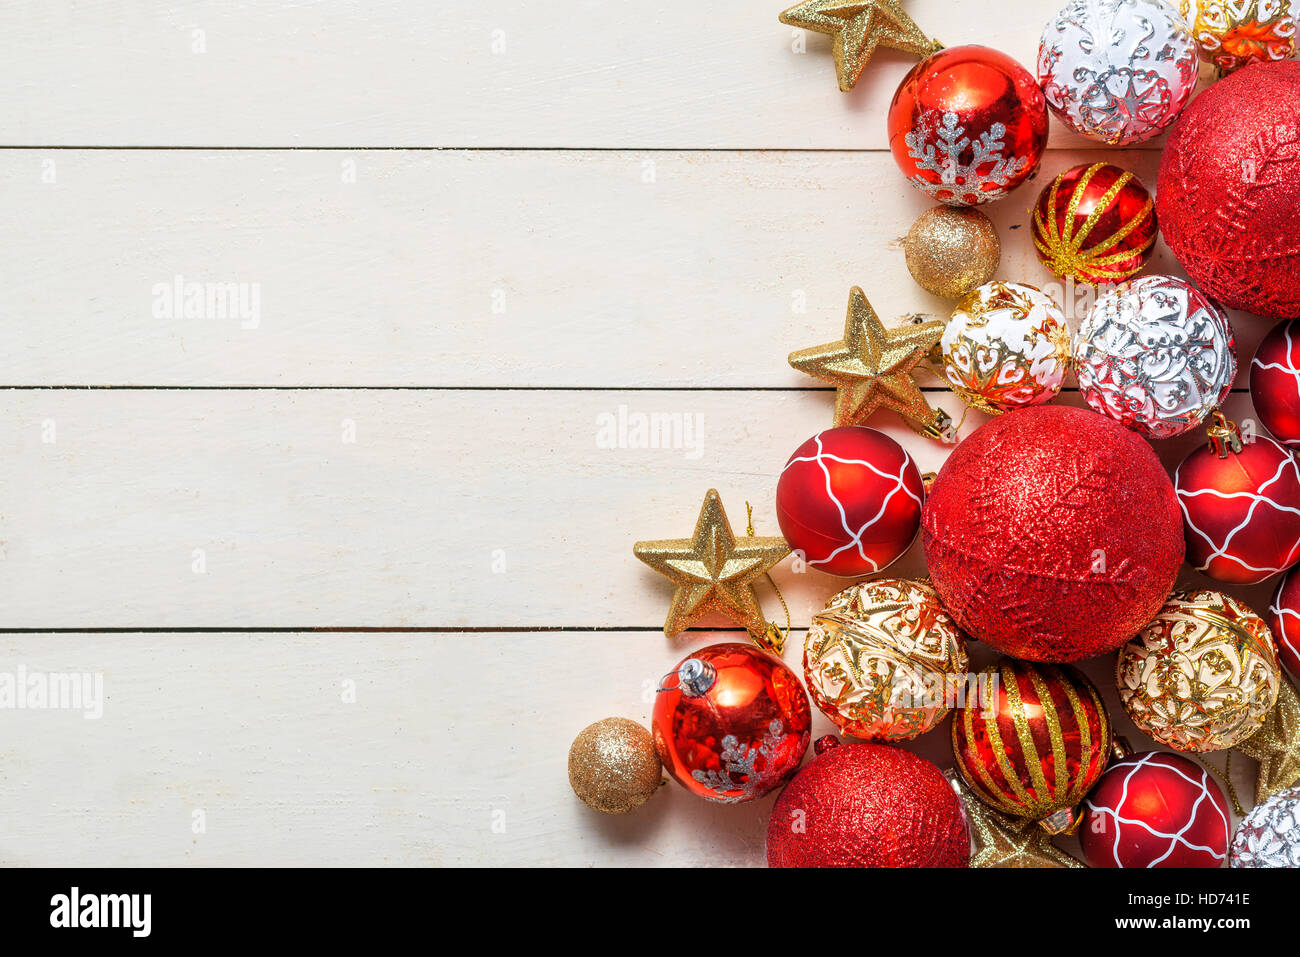 Christmas background with decorations on wooden background. Top view with copy space Stock Photo